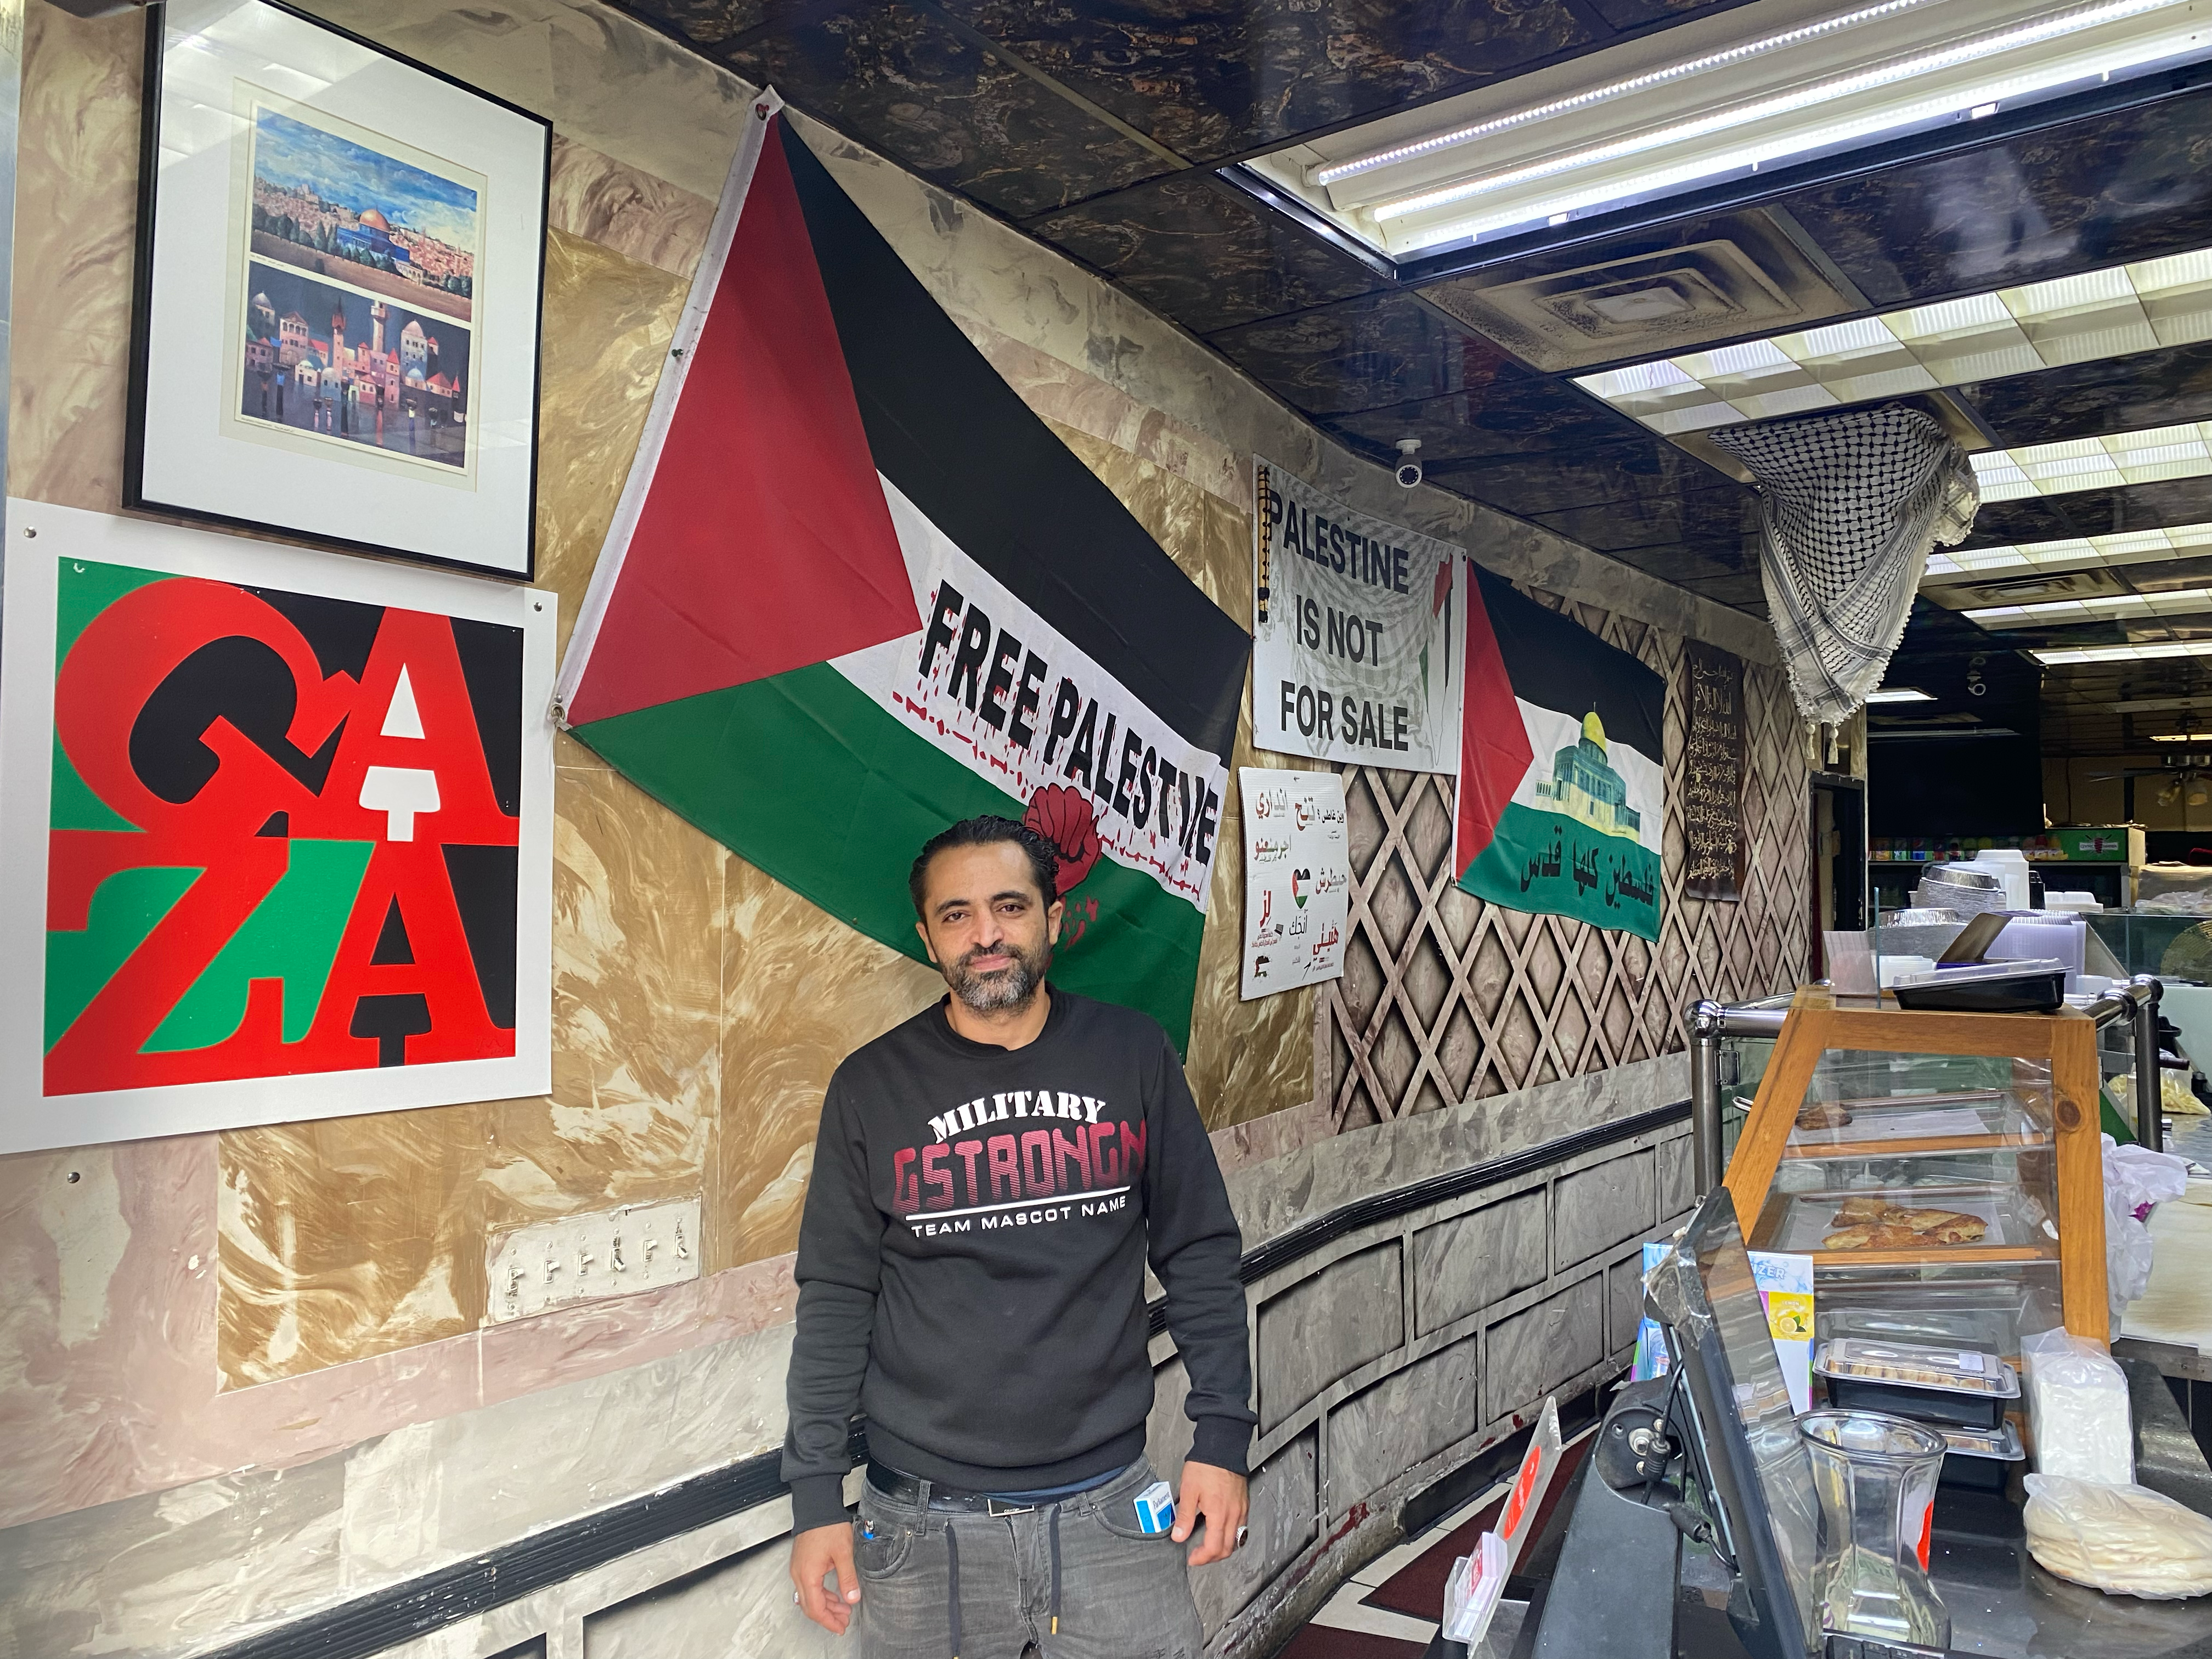 Mahmoud Kasem, the owner of the Al Aqsa bakery and restaurant in Bay Ridge, Brooklyn, says he fears for his sons’ safety after a 6-year-old Palestinian-American boy was murdered